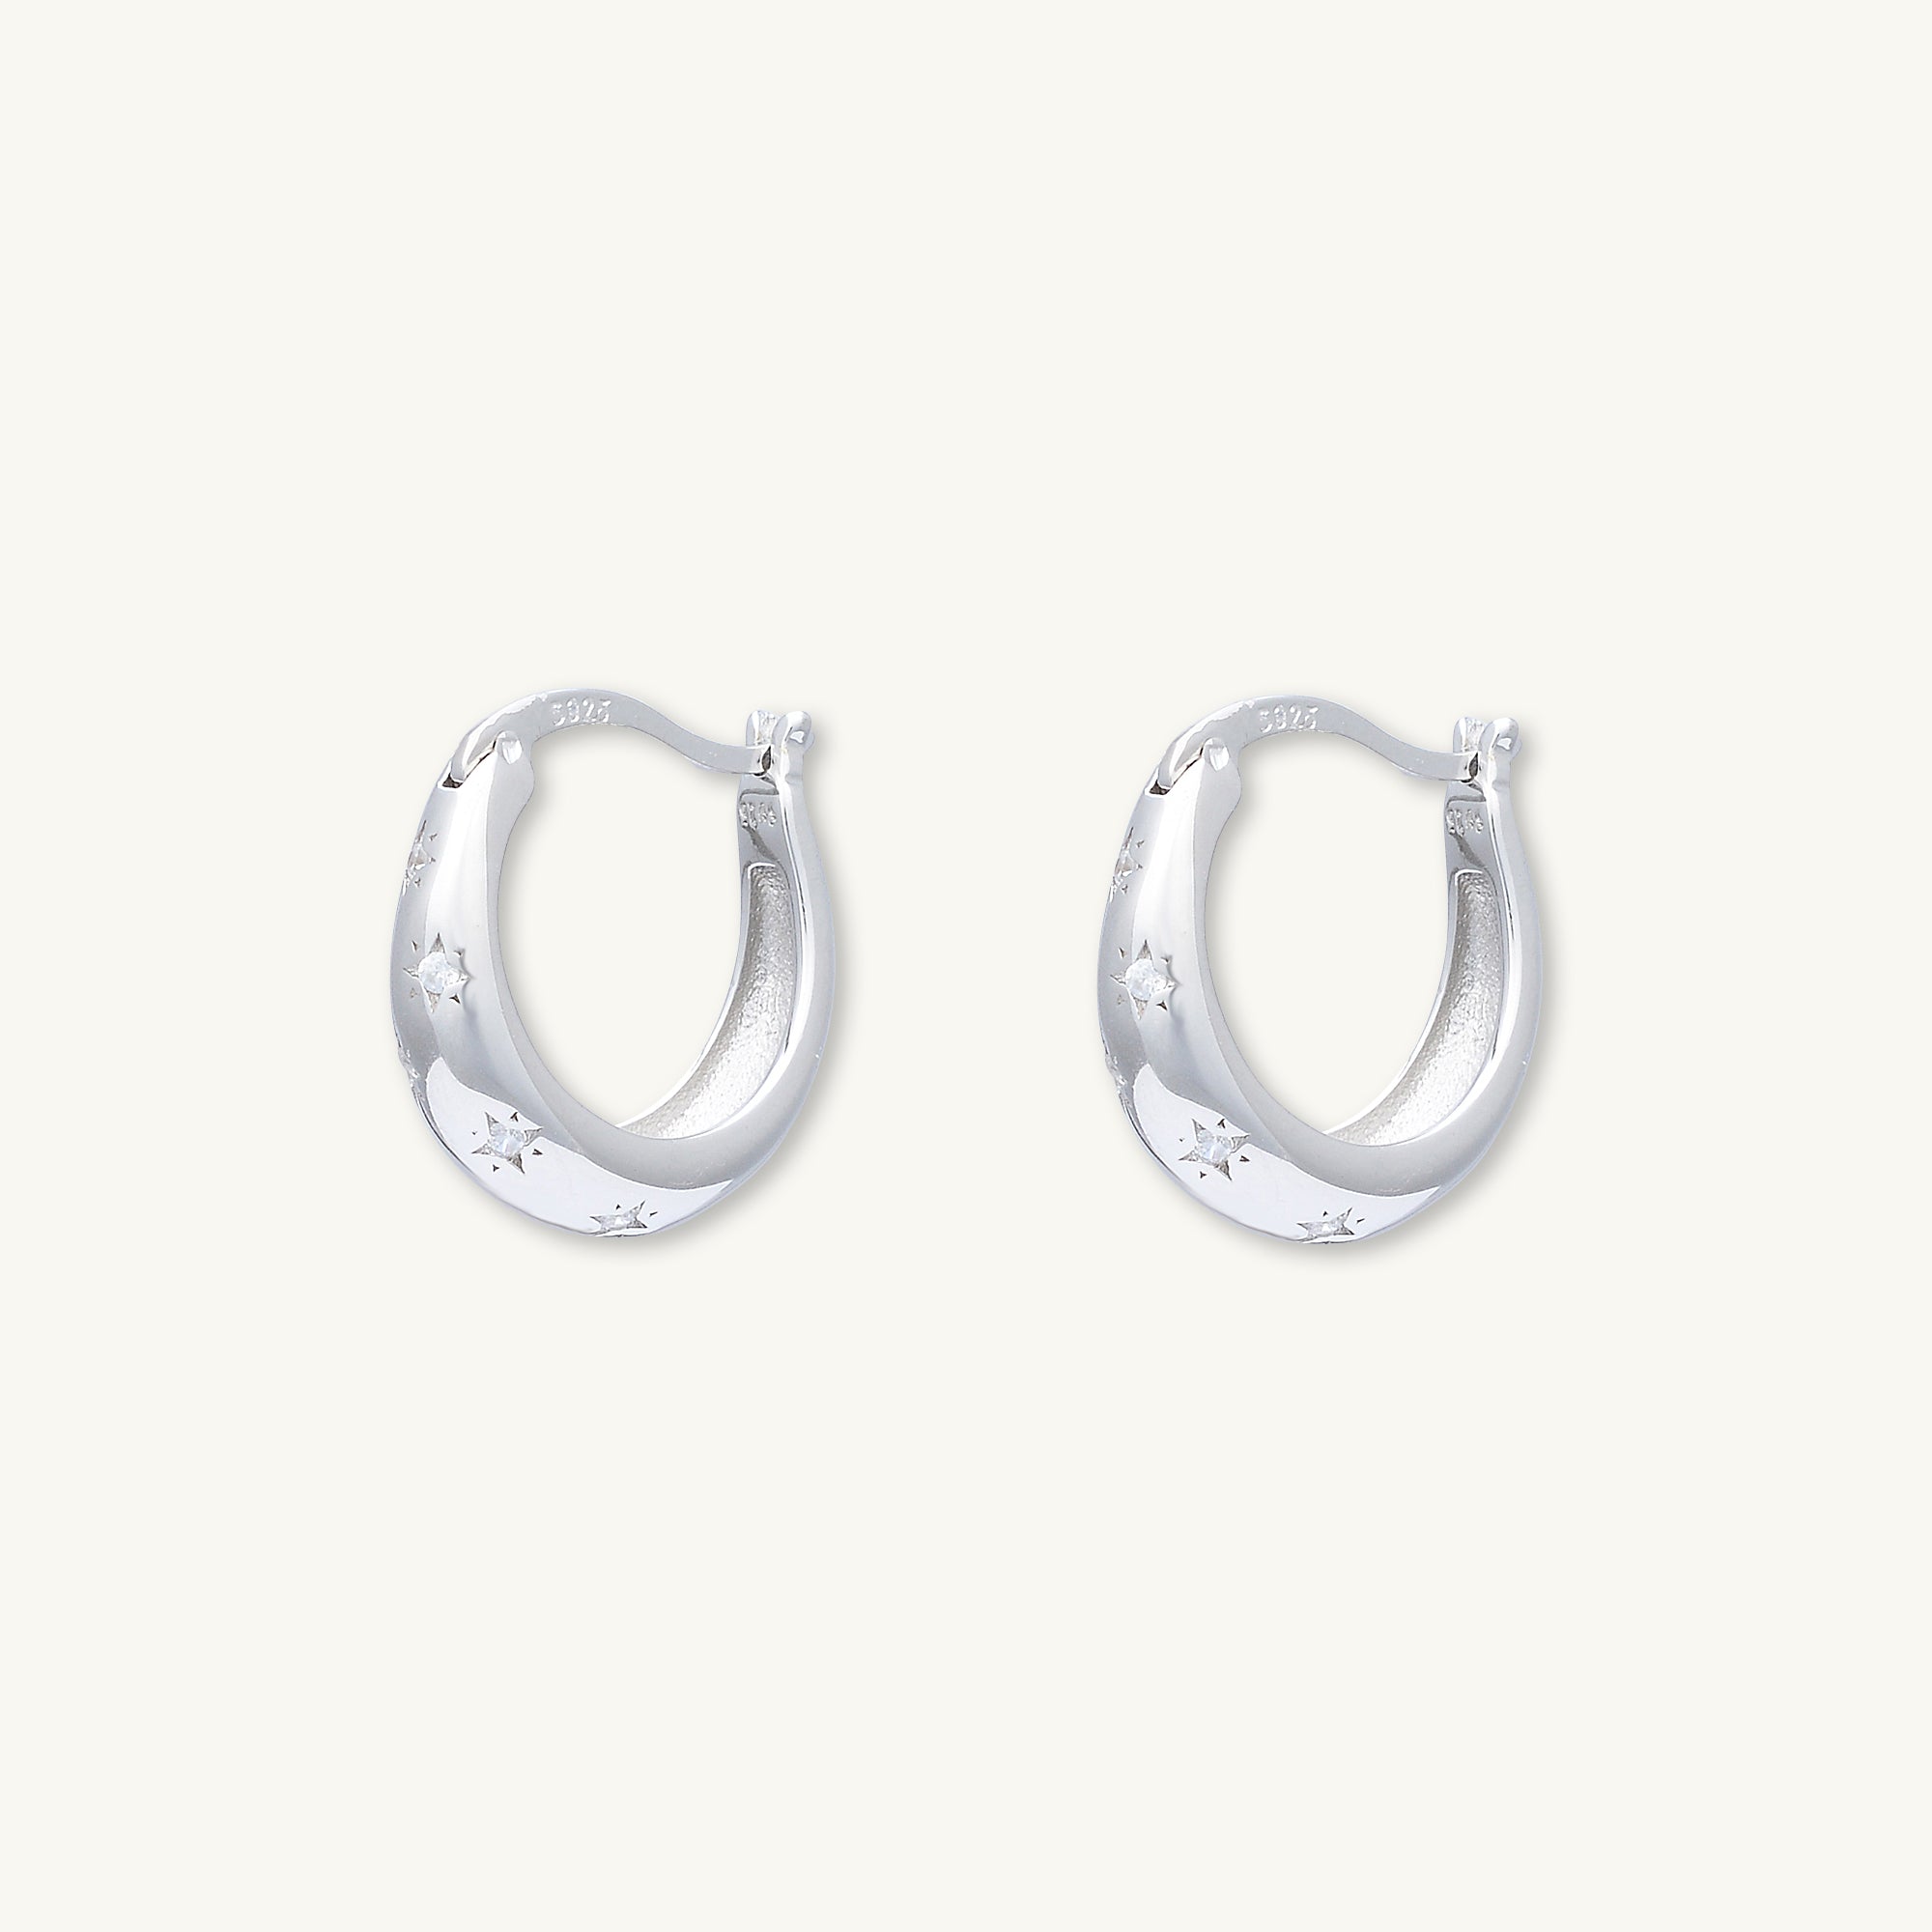 North Star Thick Sapphire Huggie Earrings